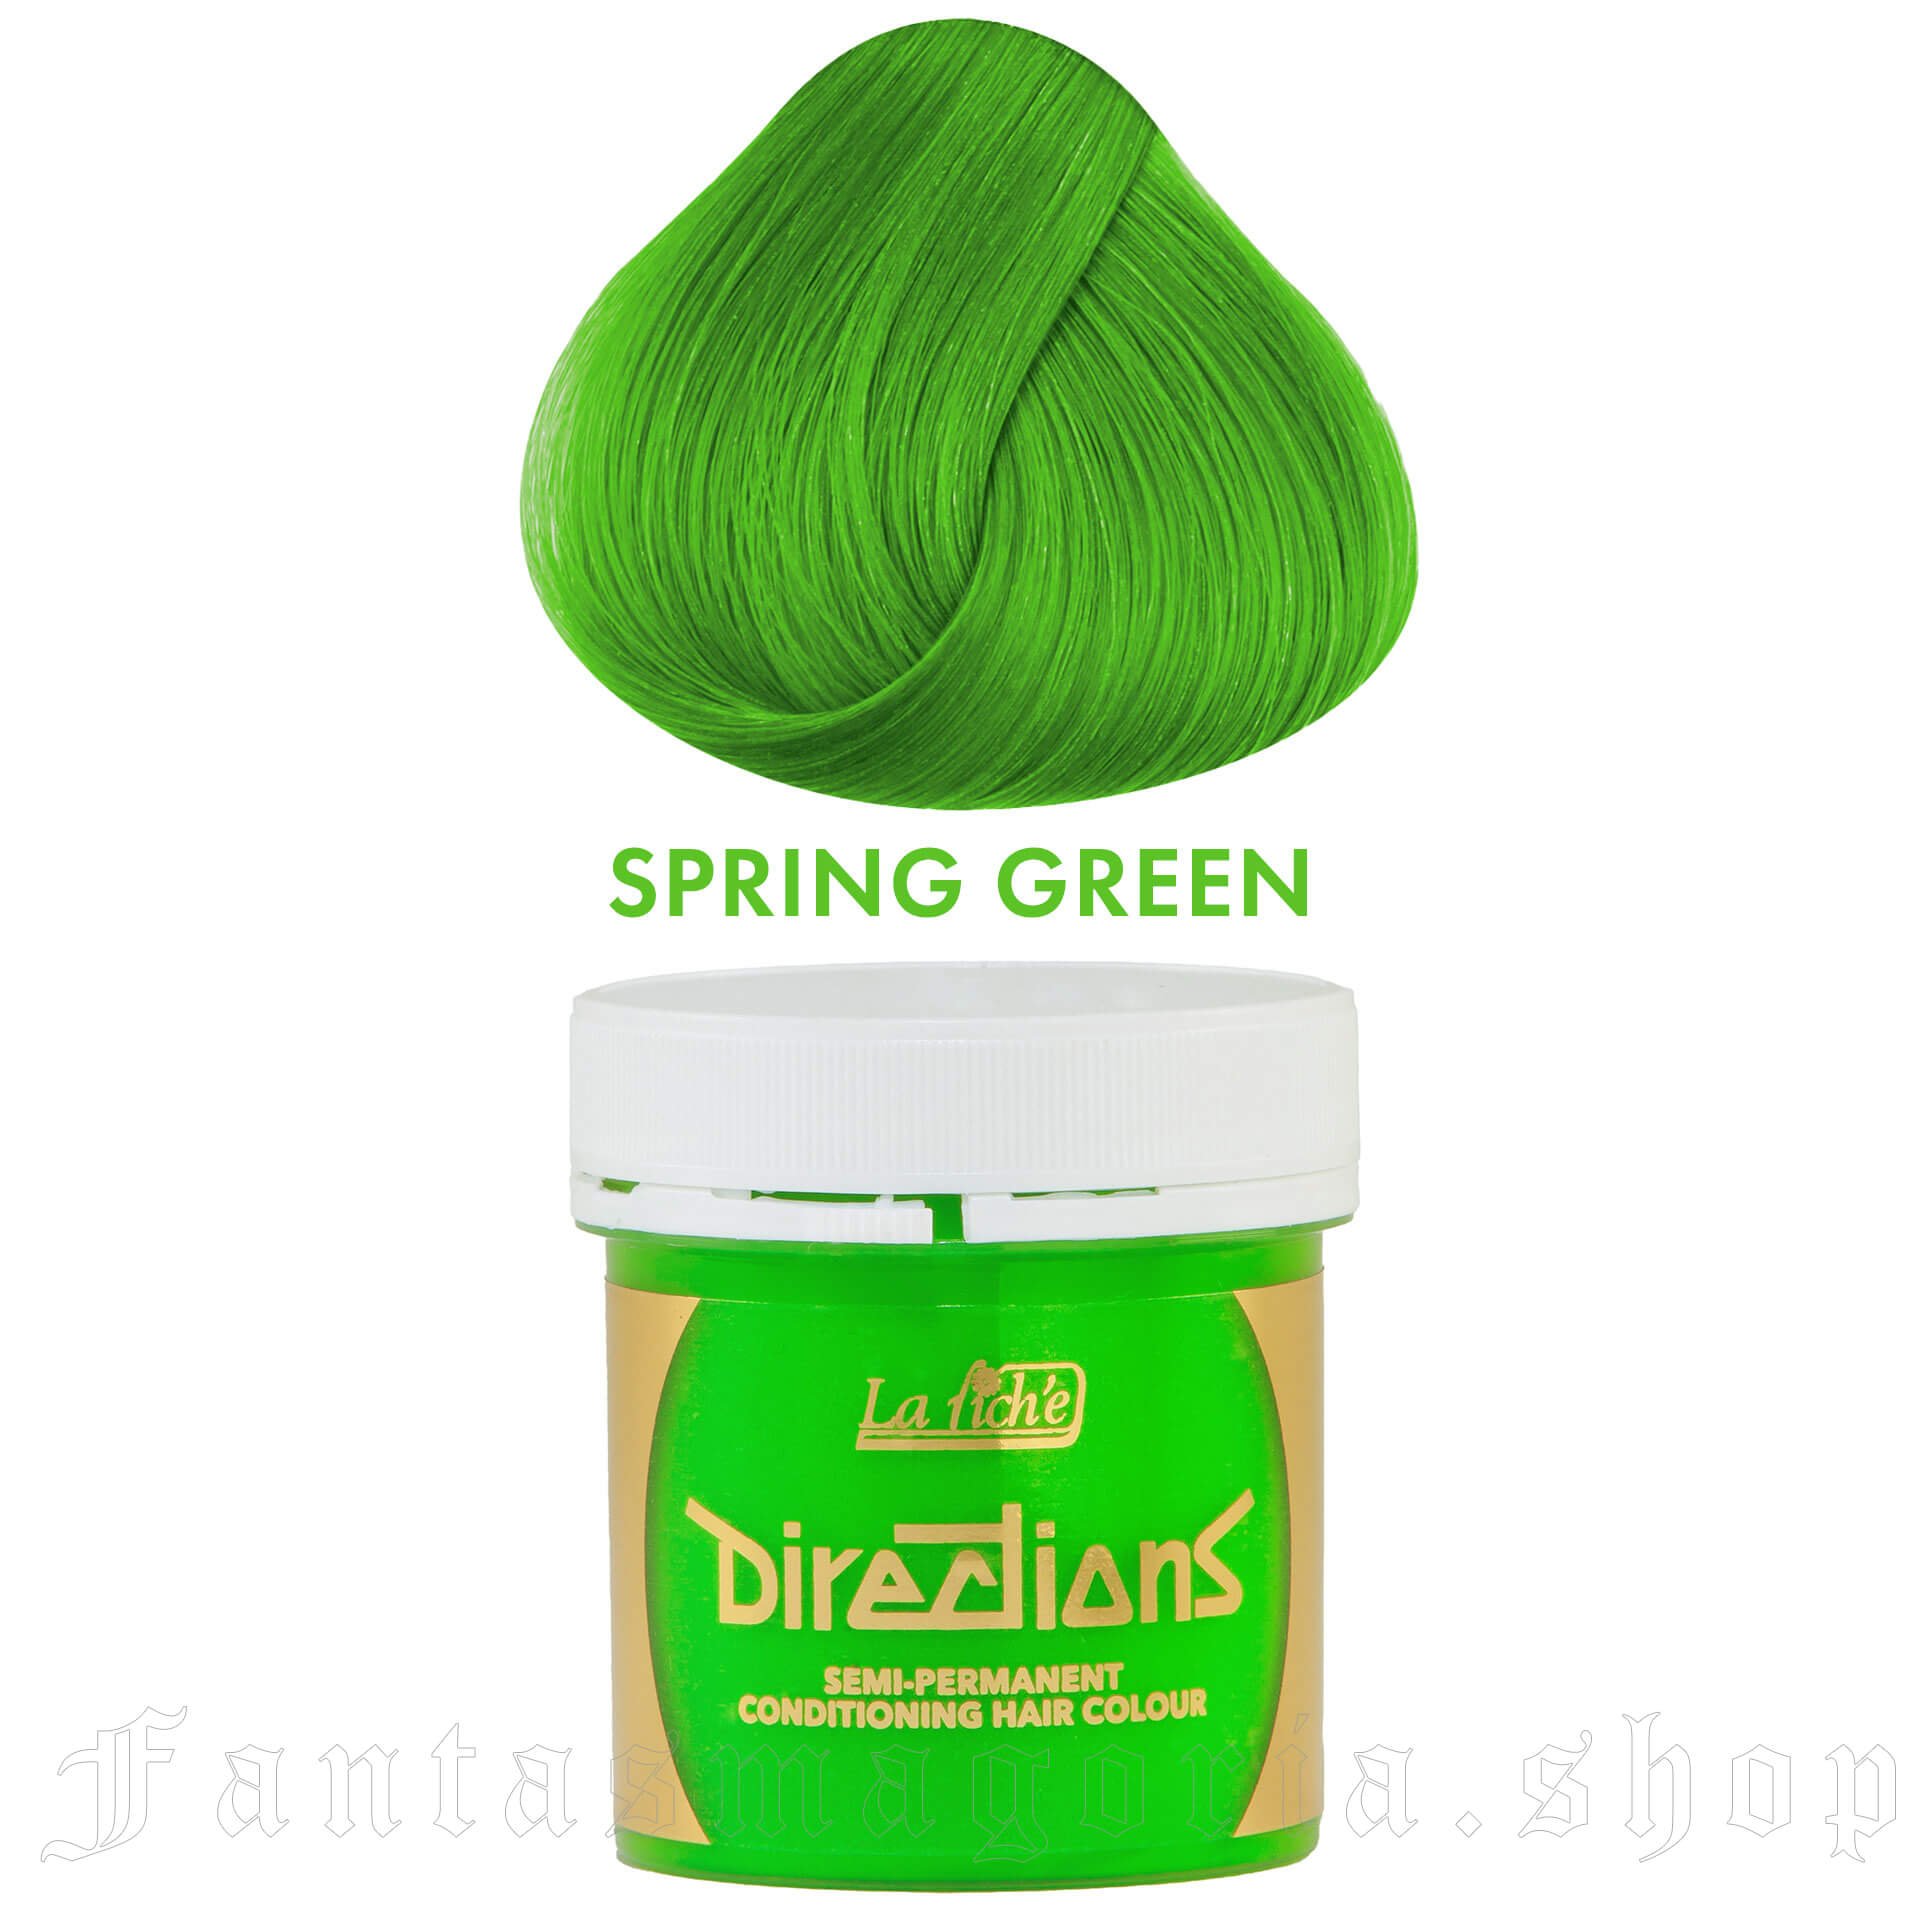 Spring Green Hair Coloring Balsam - Directions - DIRECTIONS/SPRING-GREEN 1